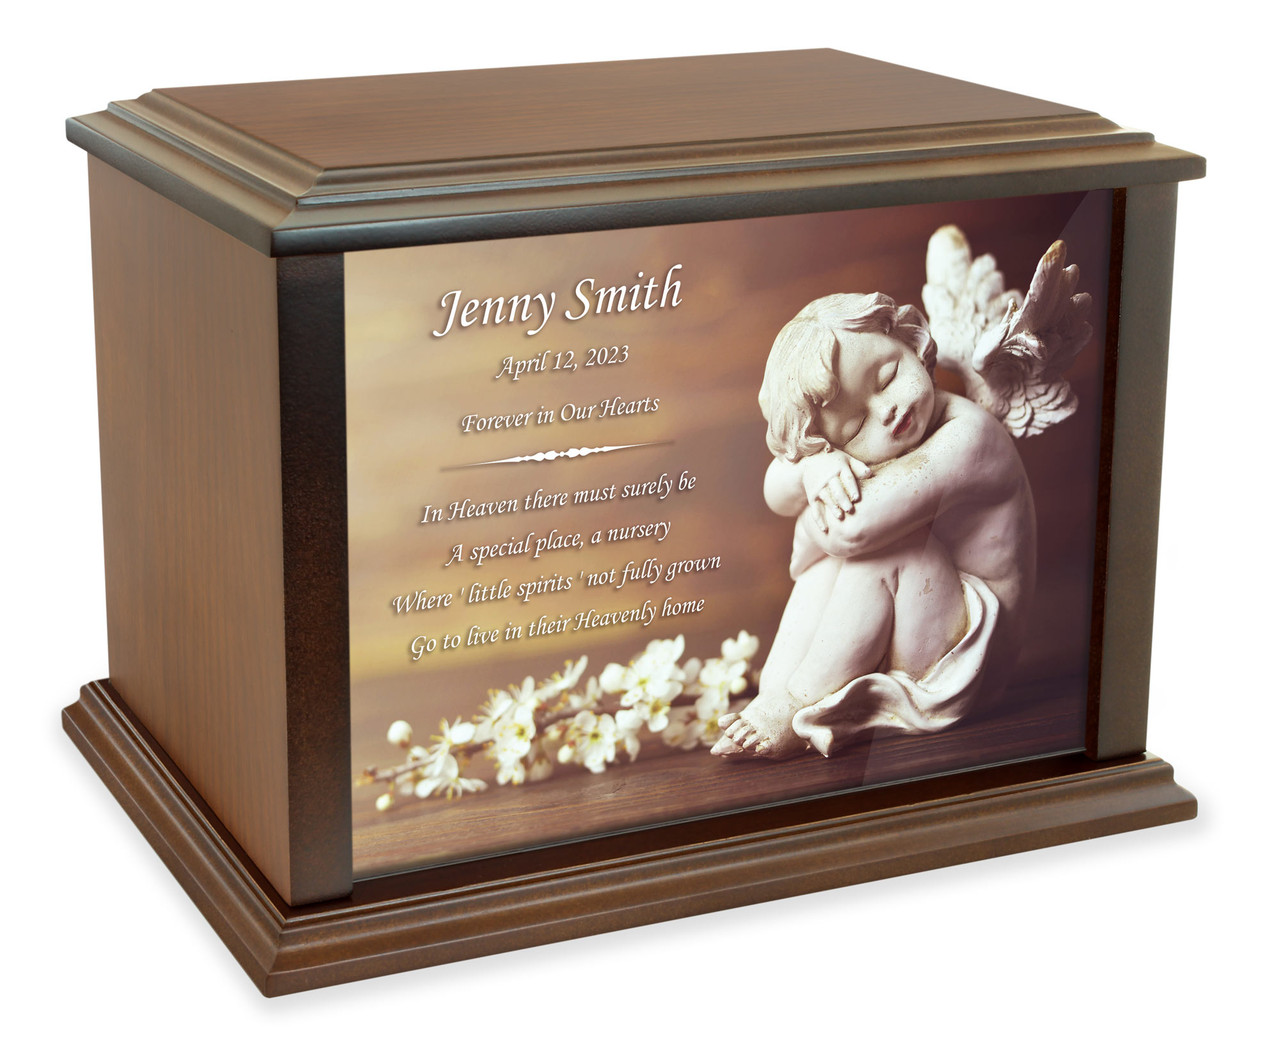 Cherub Guardian Angel Baby Eternal Reflections Wood Cremation Urn - Urns for Ashes by Mainely Urns